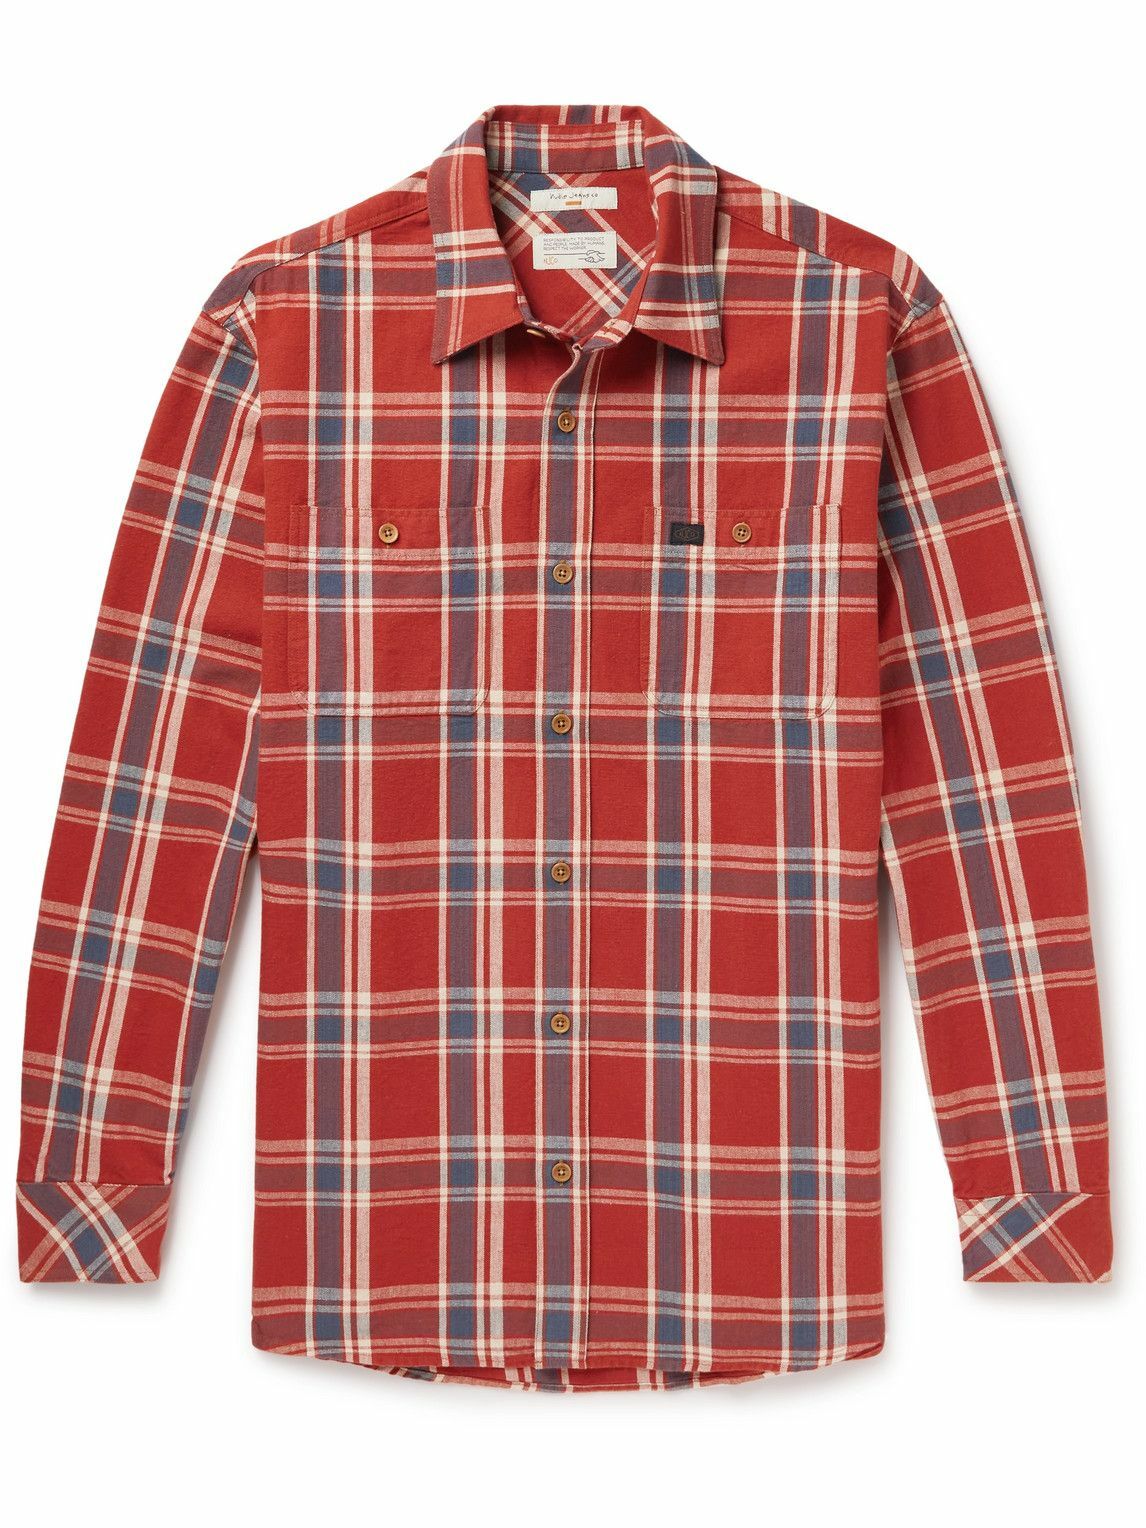 Nudie Jeans - Filip Checked Cotton-Poplin Shirt - Red Nudie Jeans Co